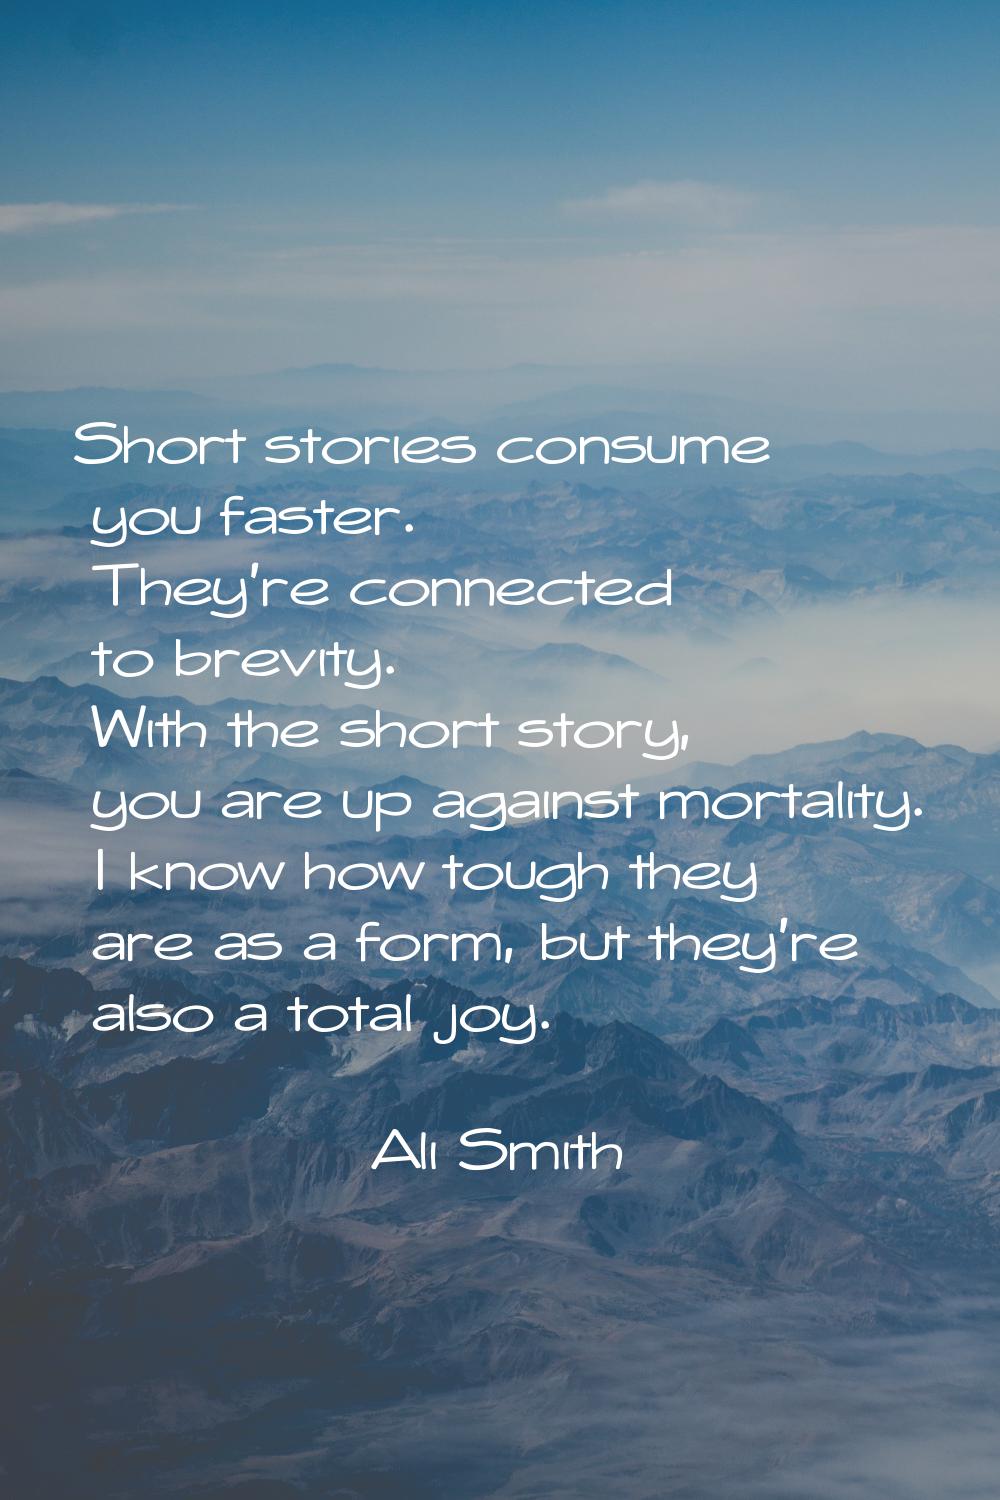 Short stories consume you faster. They're connected to brevity. With the short story, you are up ag